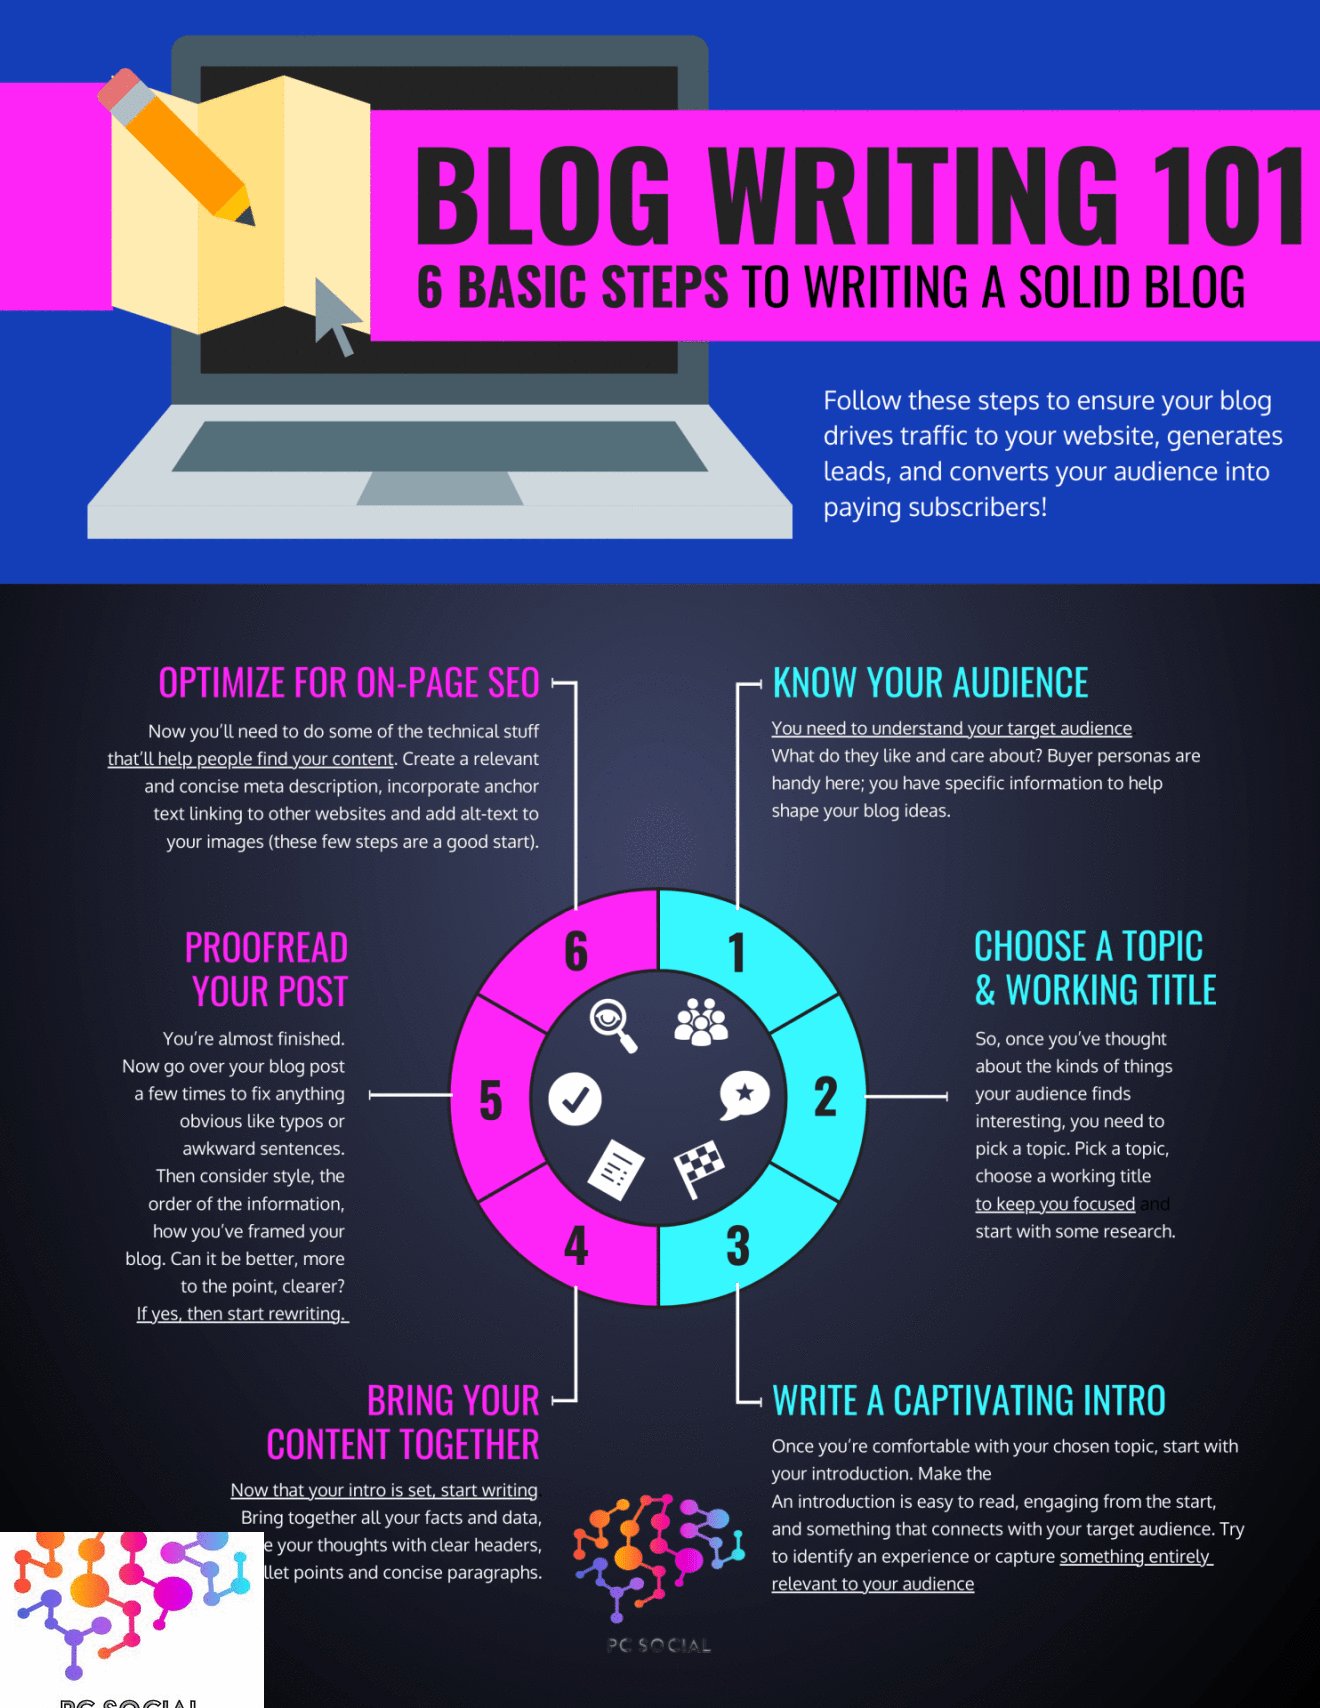 Blog, Blog Tips, Niche Writing, Marketing, Articles Project Consultants, Llc | Pc Social